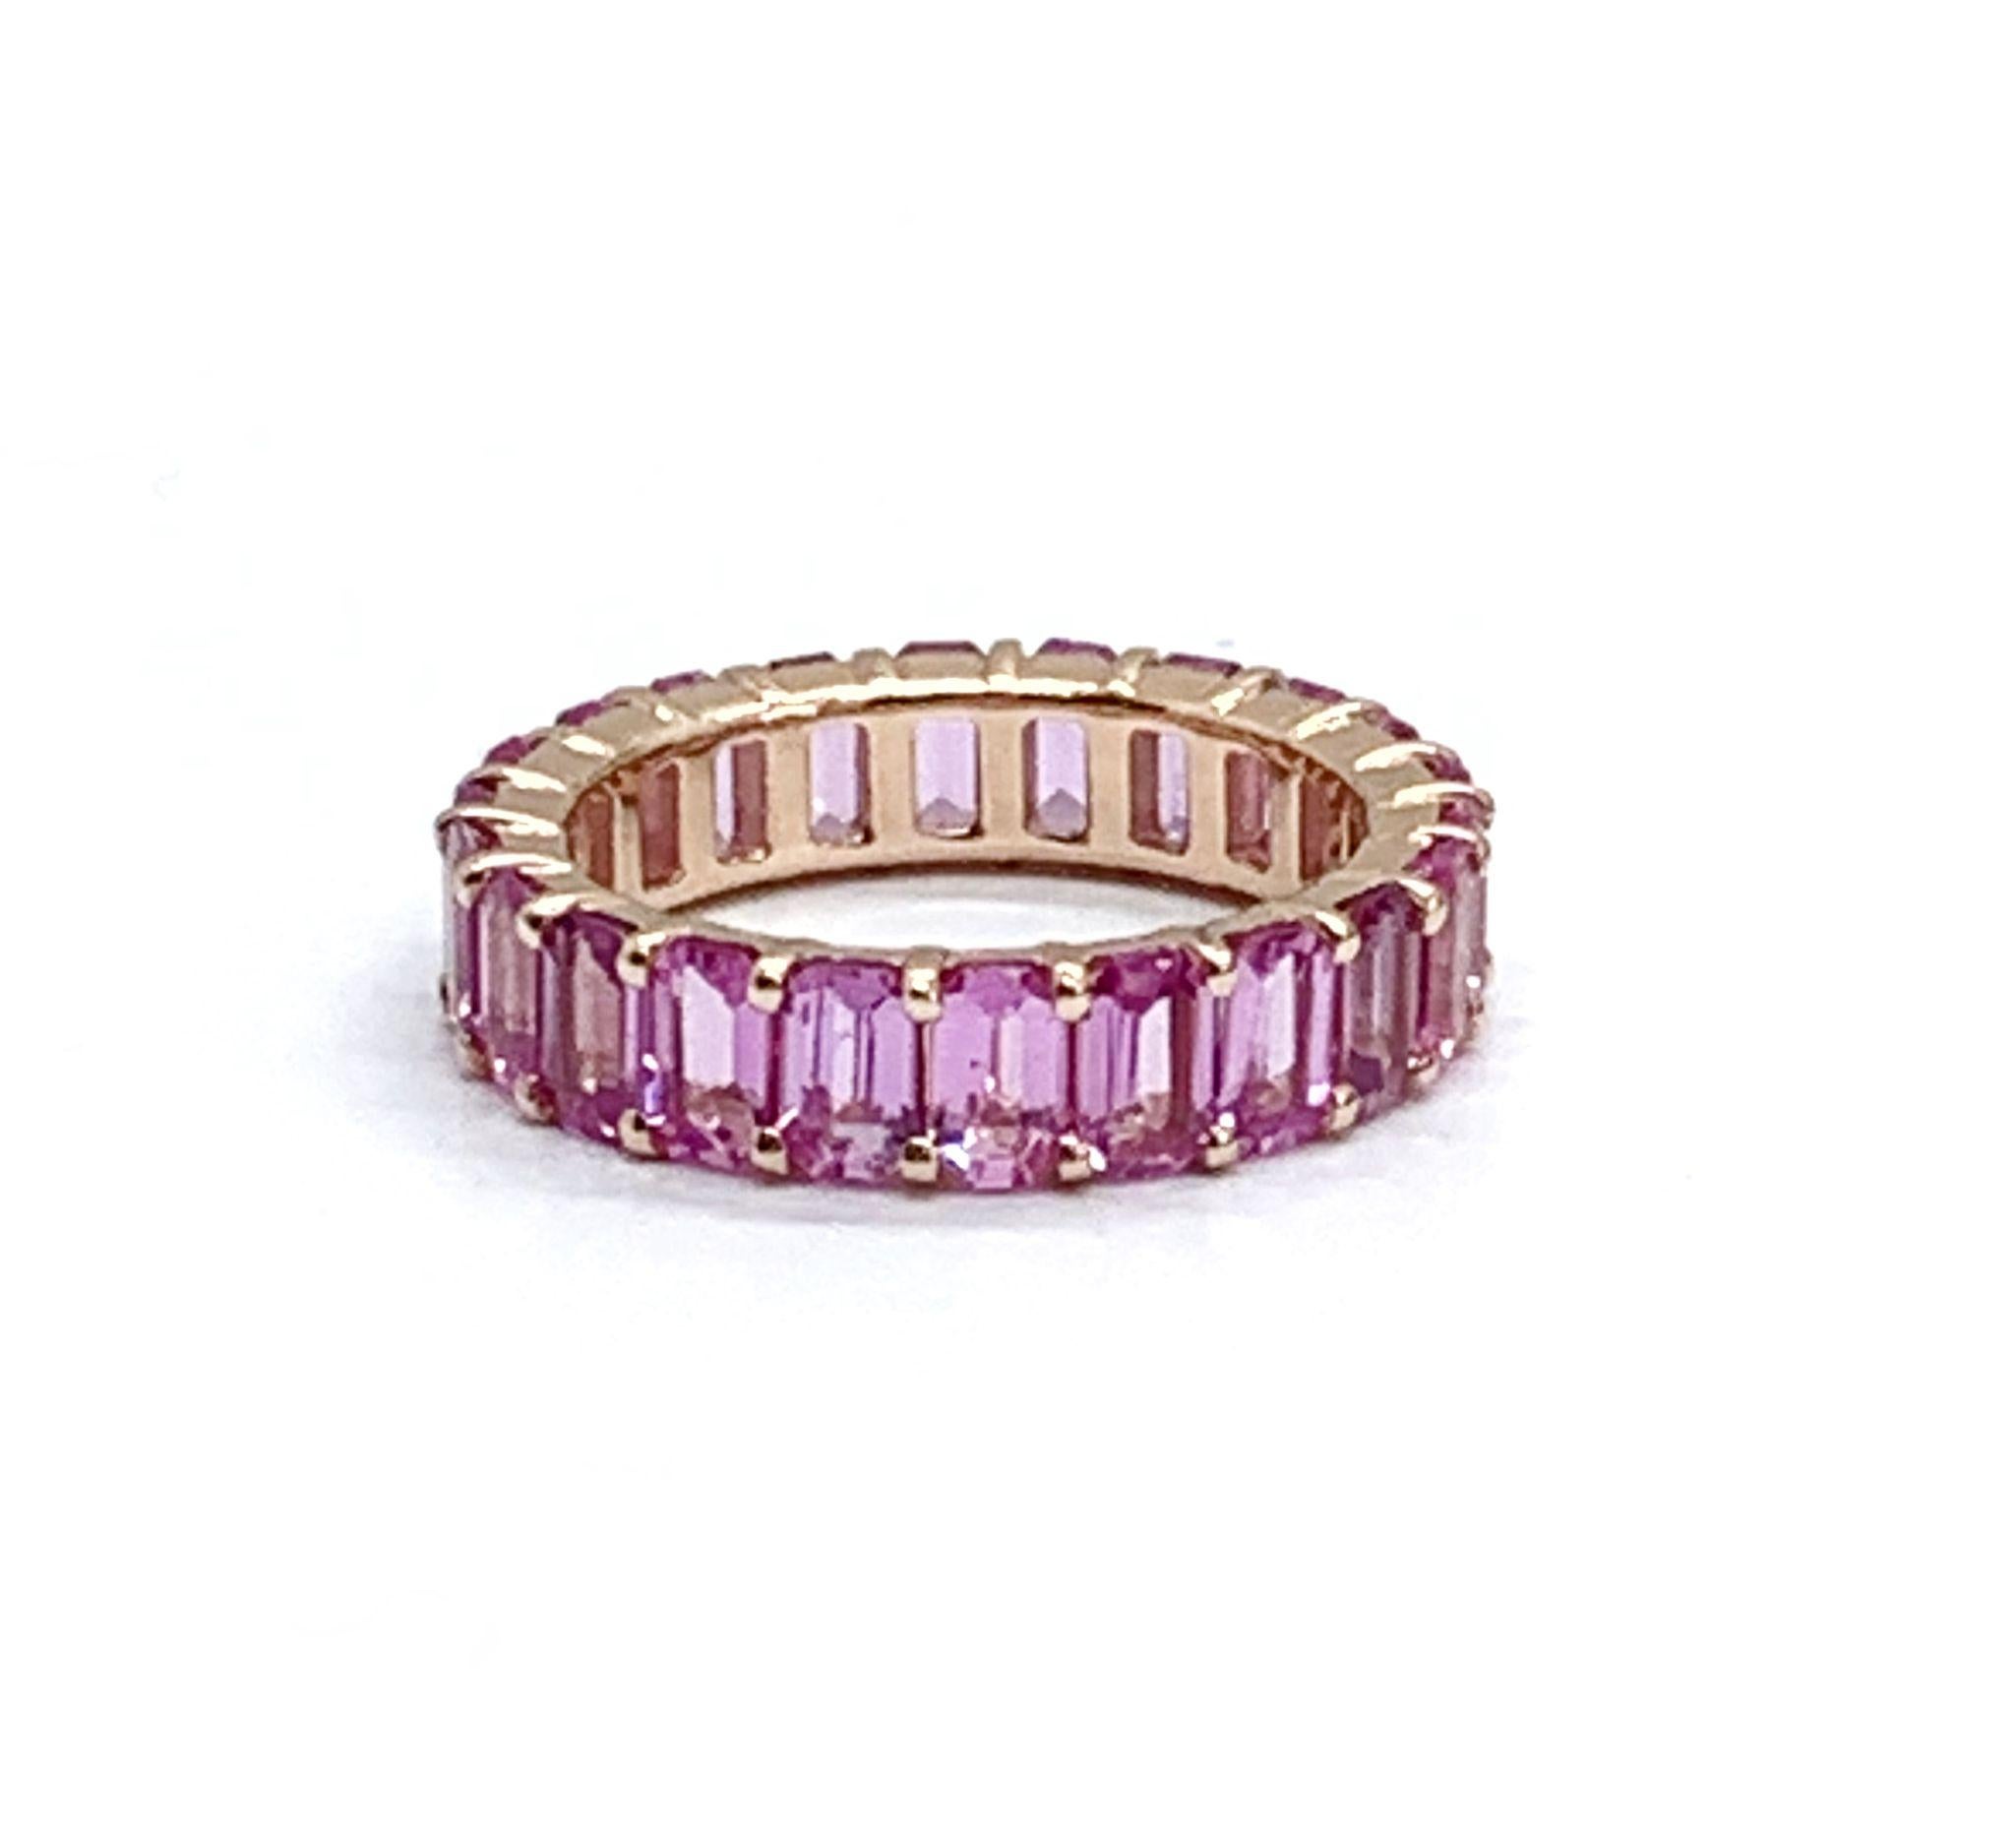 Andreoli Pink Sapphire 18 Karat Rose Gold Eternity Band

This ring features:
- 6.23 Carat Pink Sapphire
- 4.77 Gram 18K Rose Gold
- Made In Italy